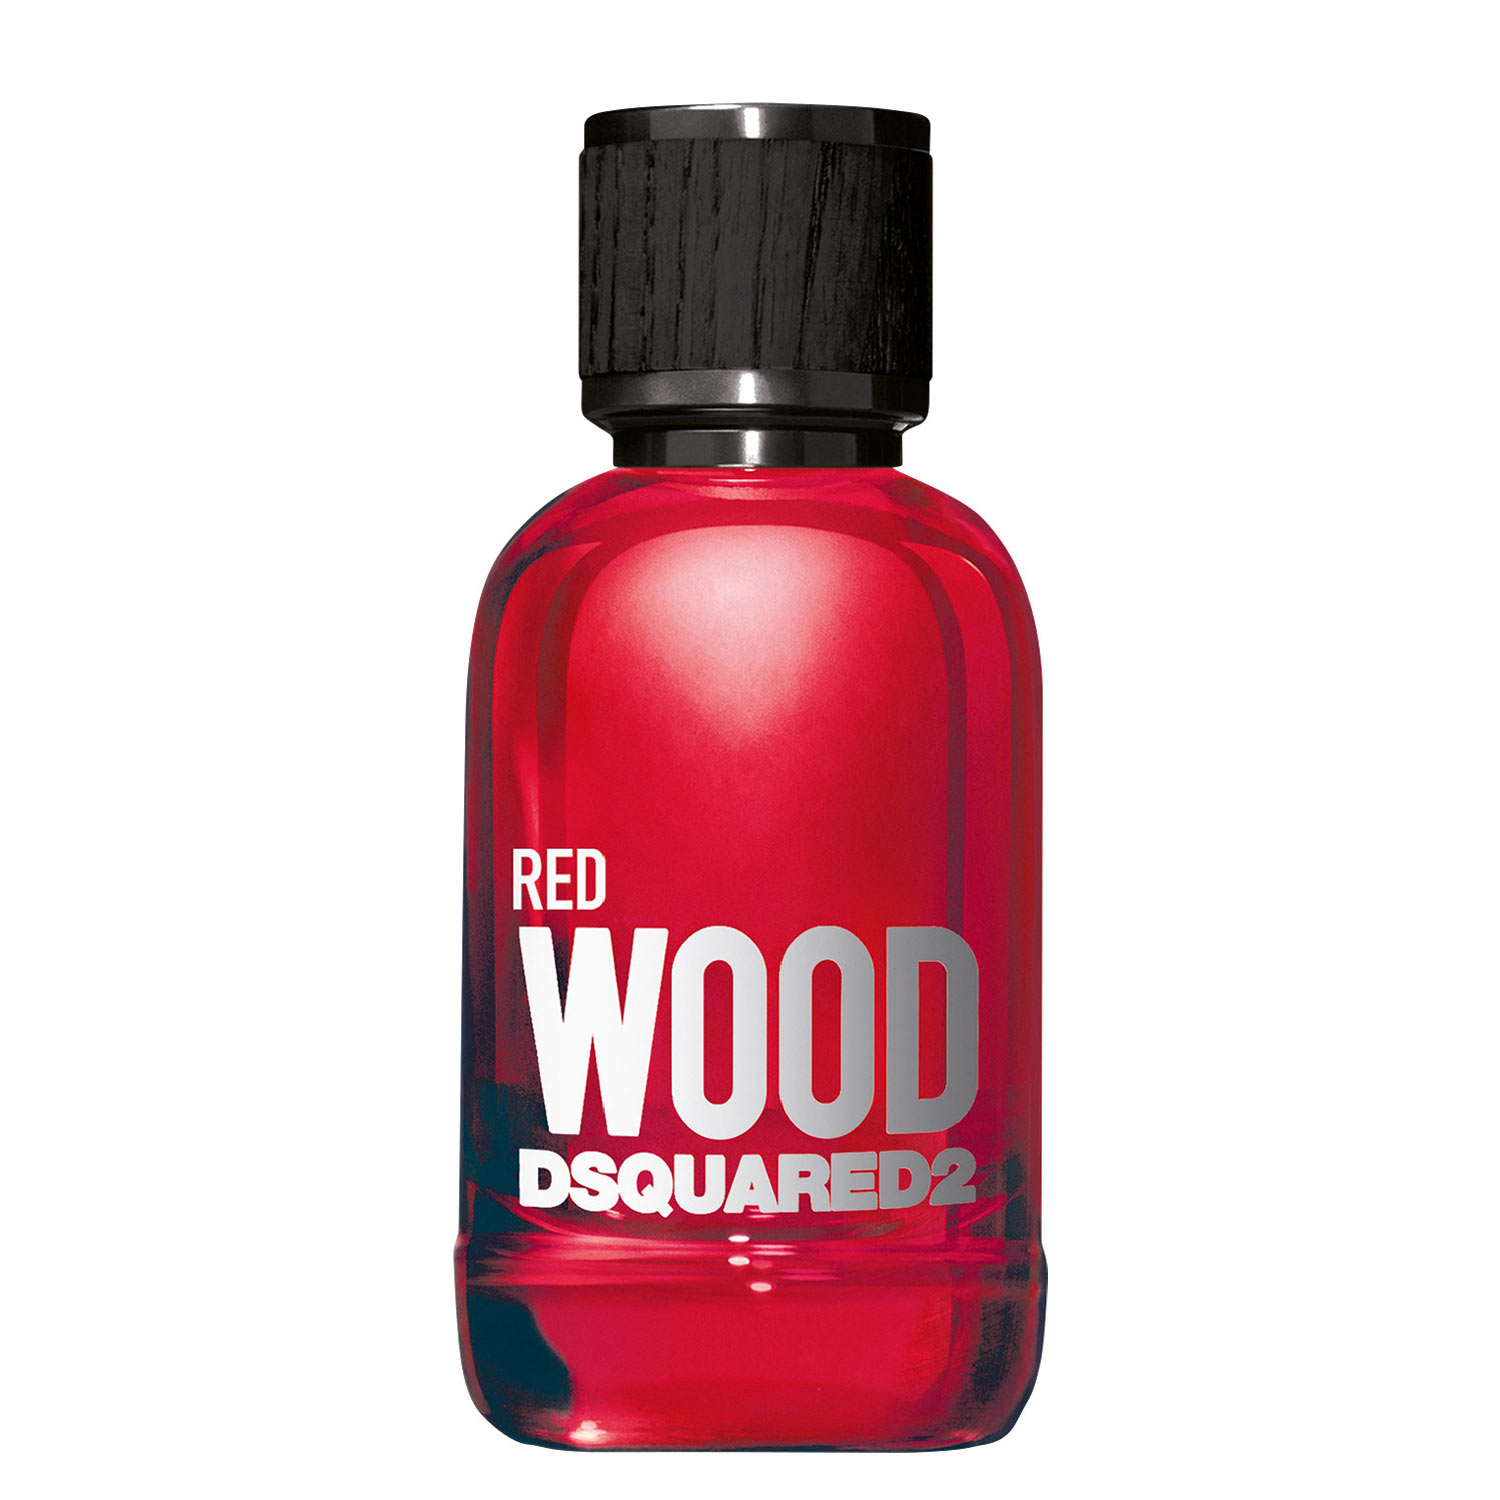 Red Wood Dsquared2 Image